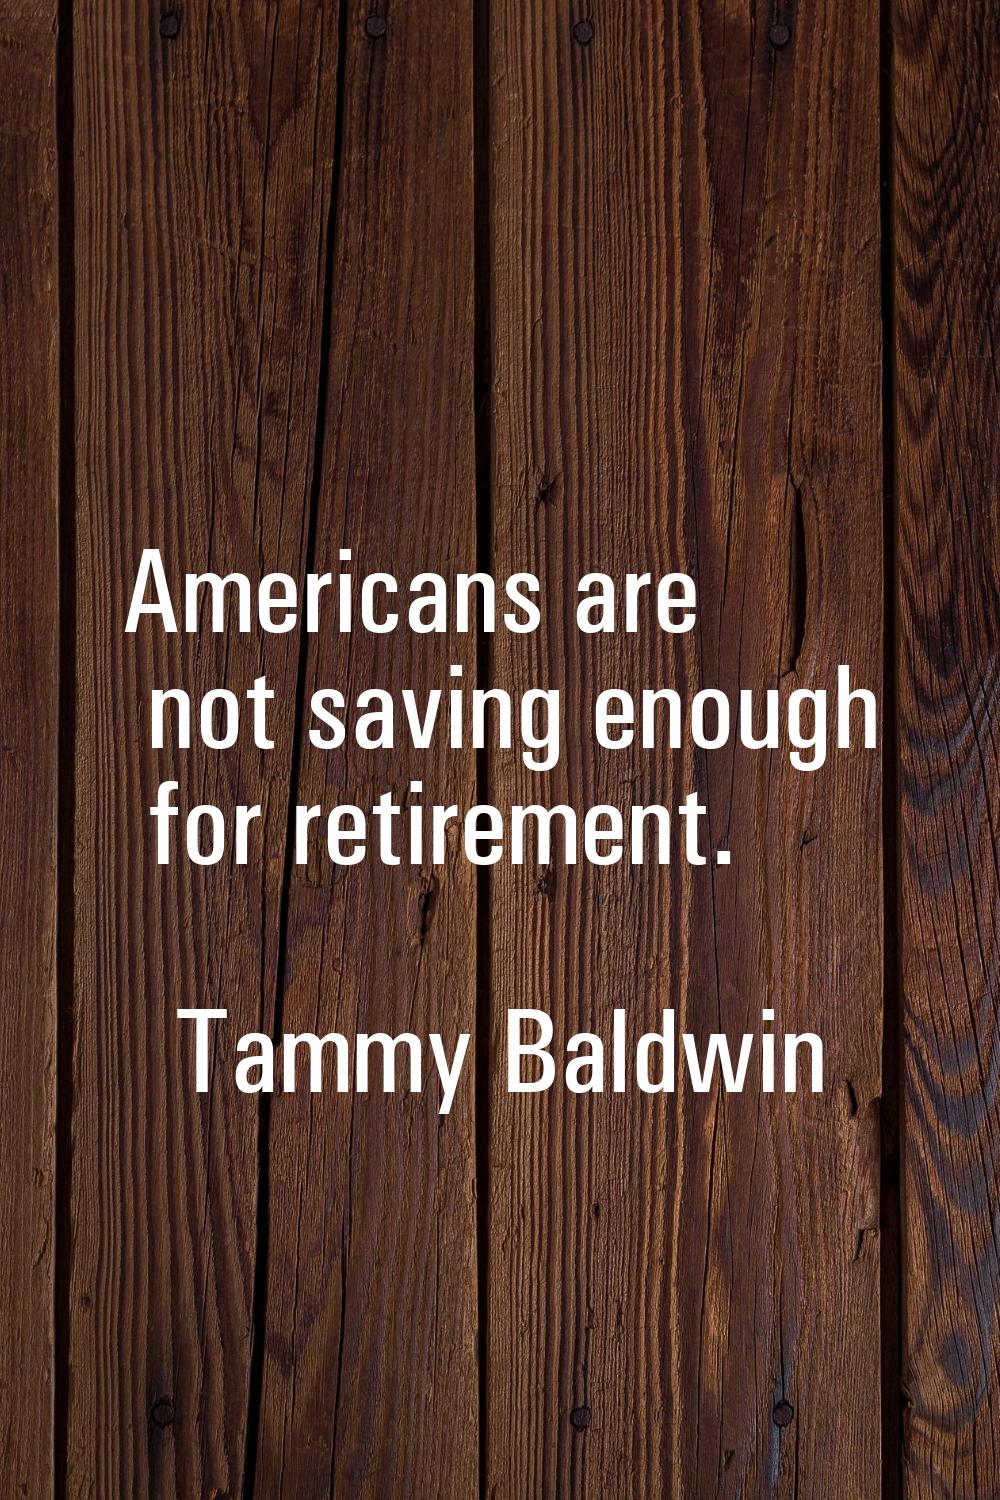 Americans are not saving enough for retirement.